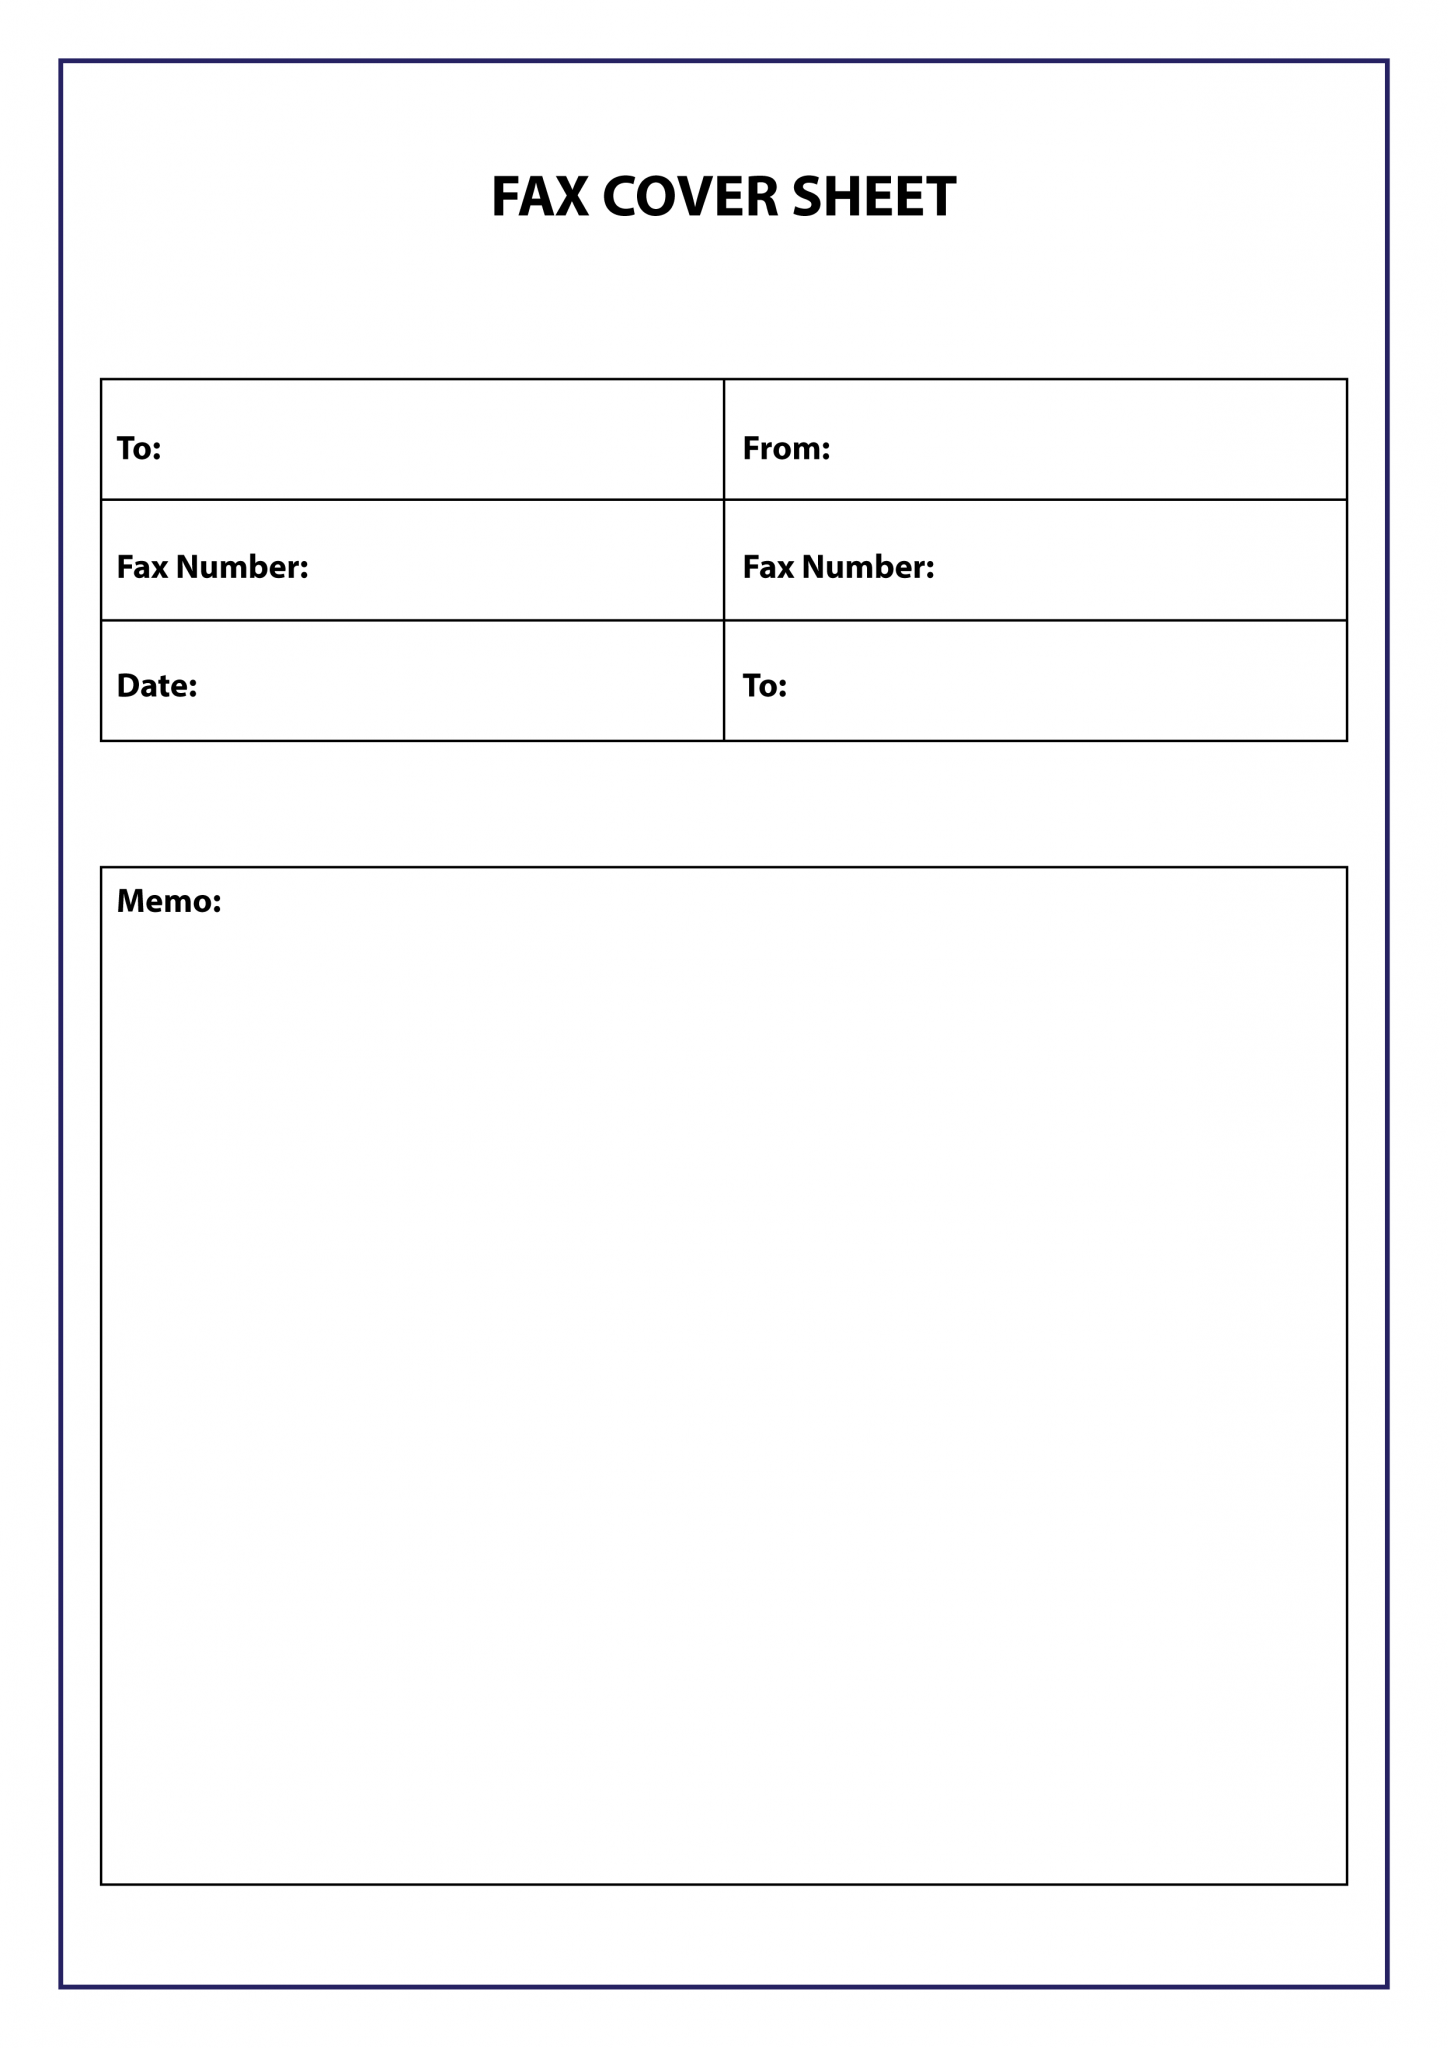 attention fax cover sheet